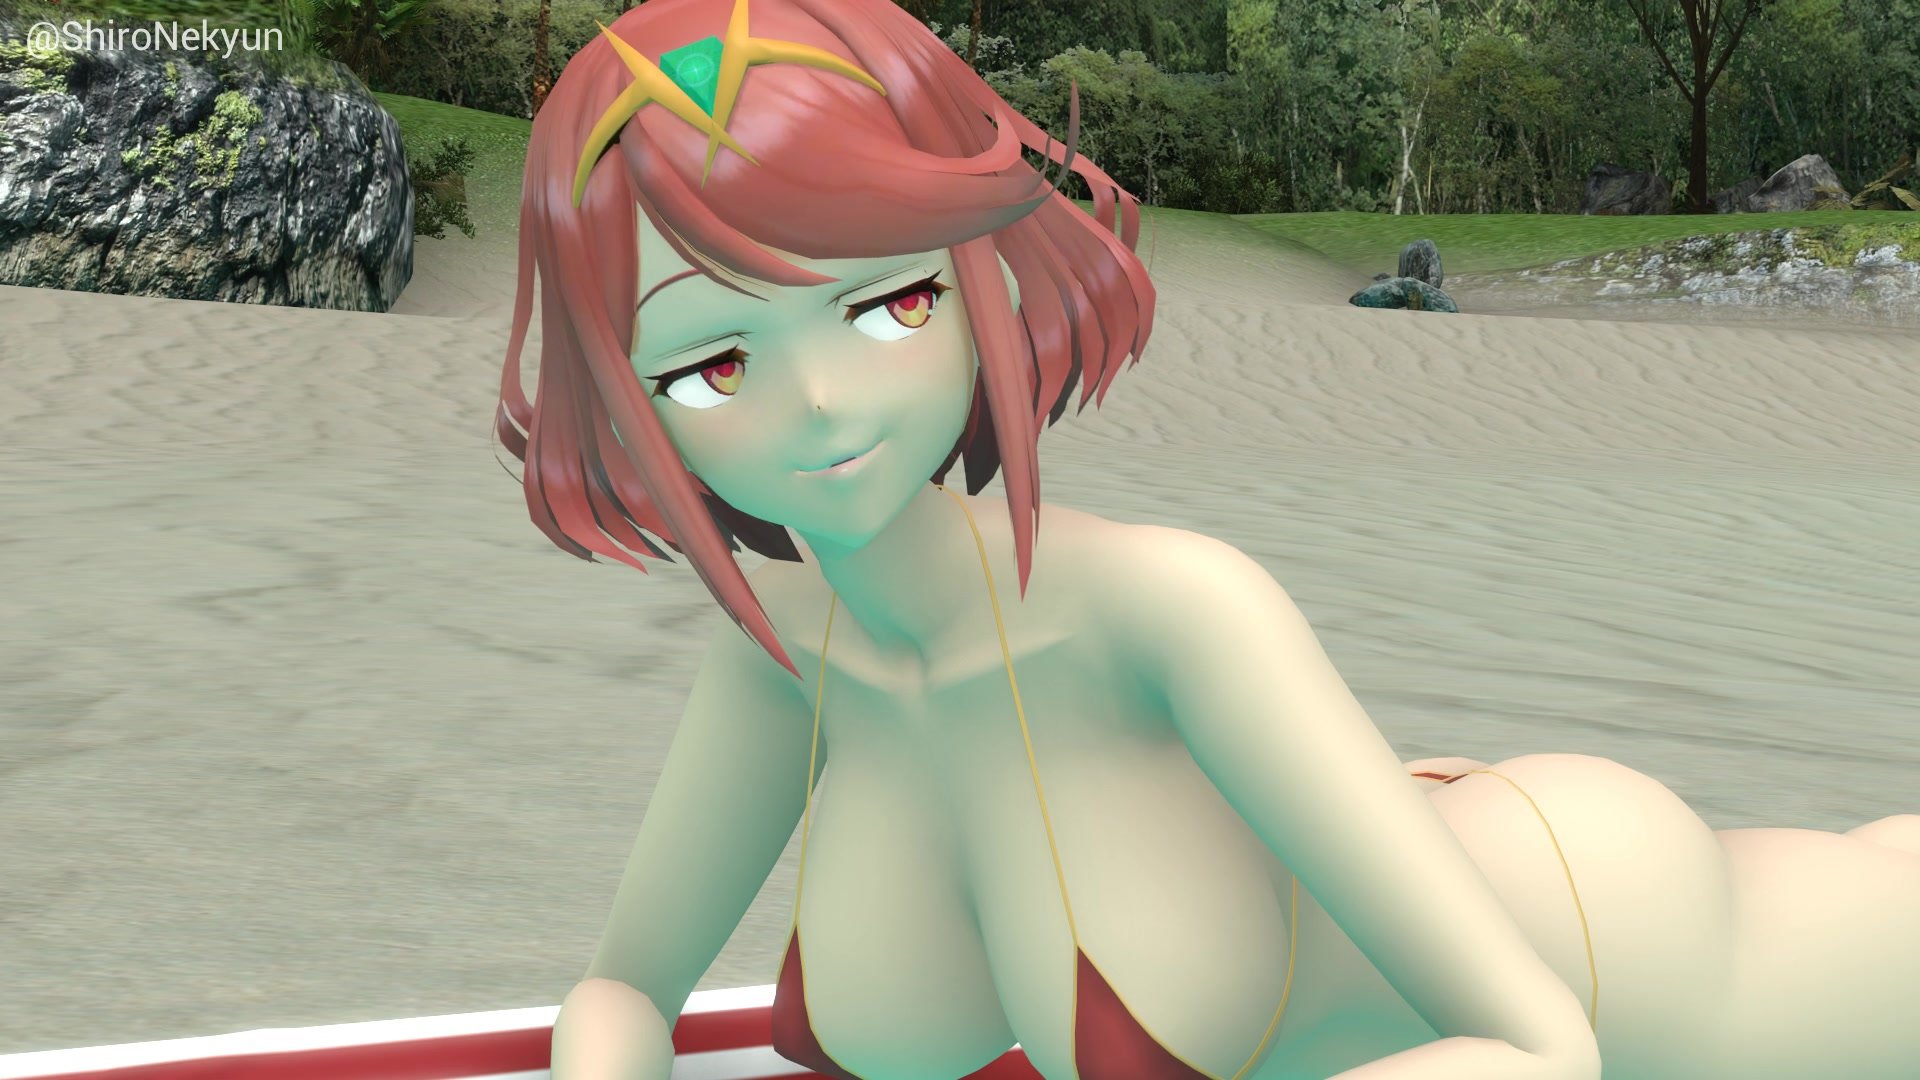 Pyra and Mythra's gassy beach day